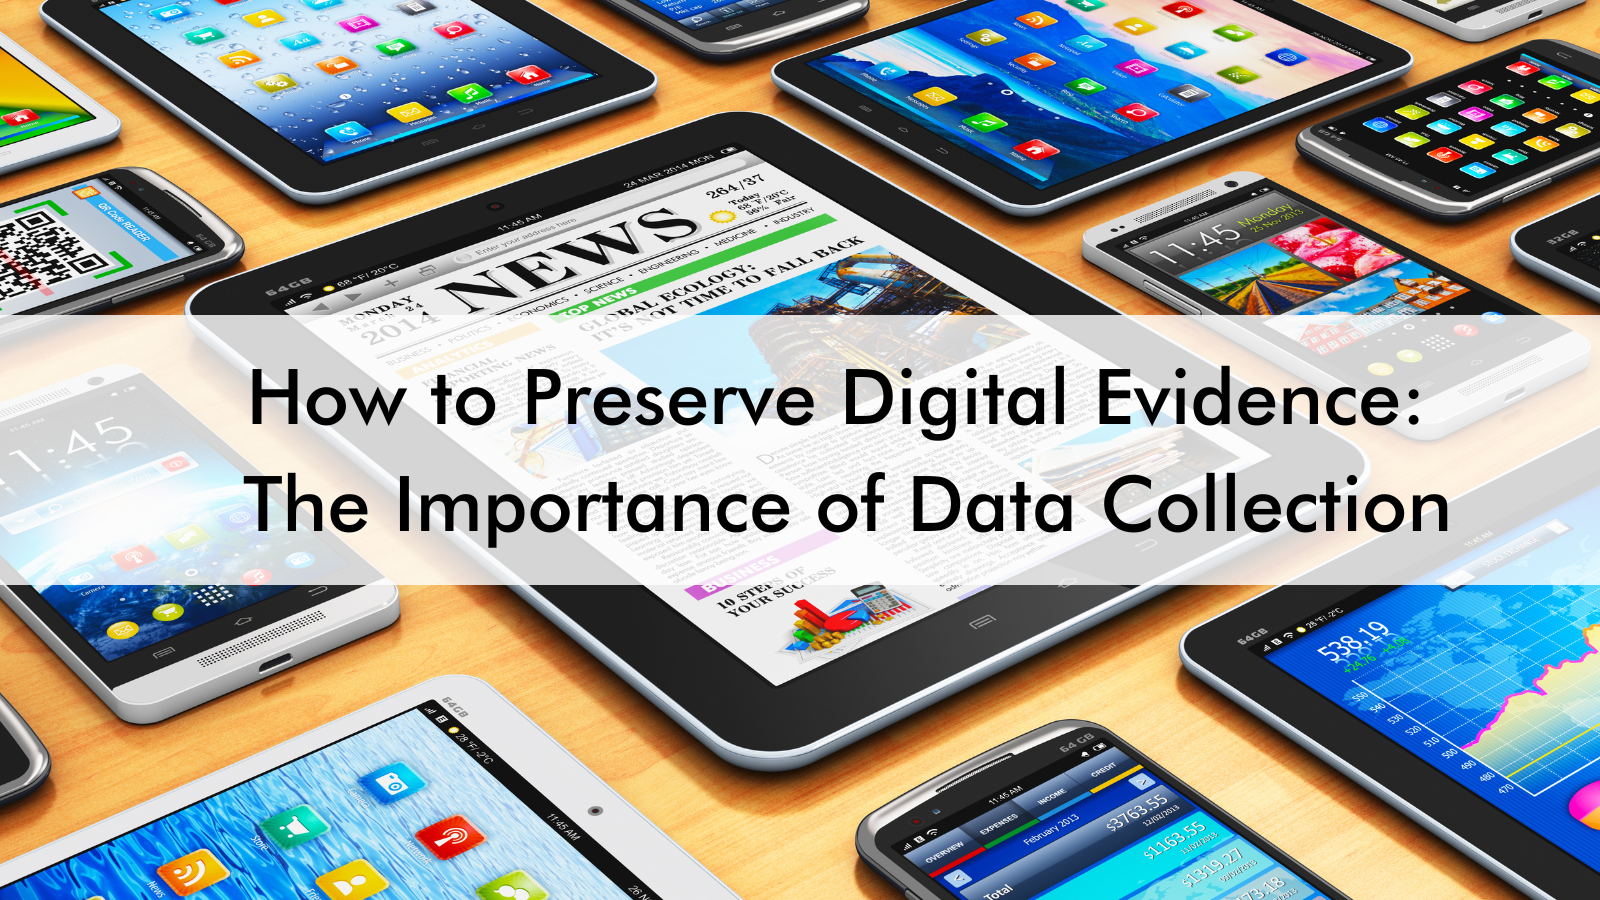 How to Preserve Digital Evidence: The Importance of Data Collection